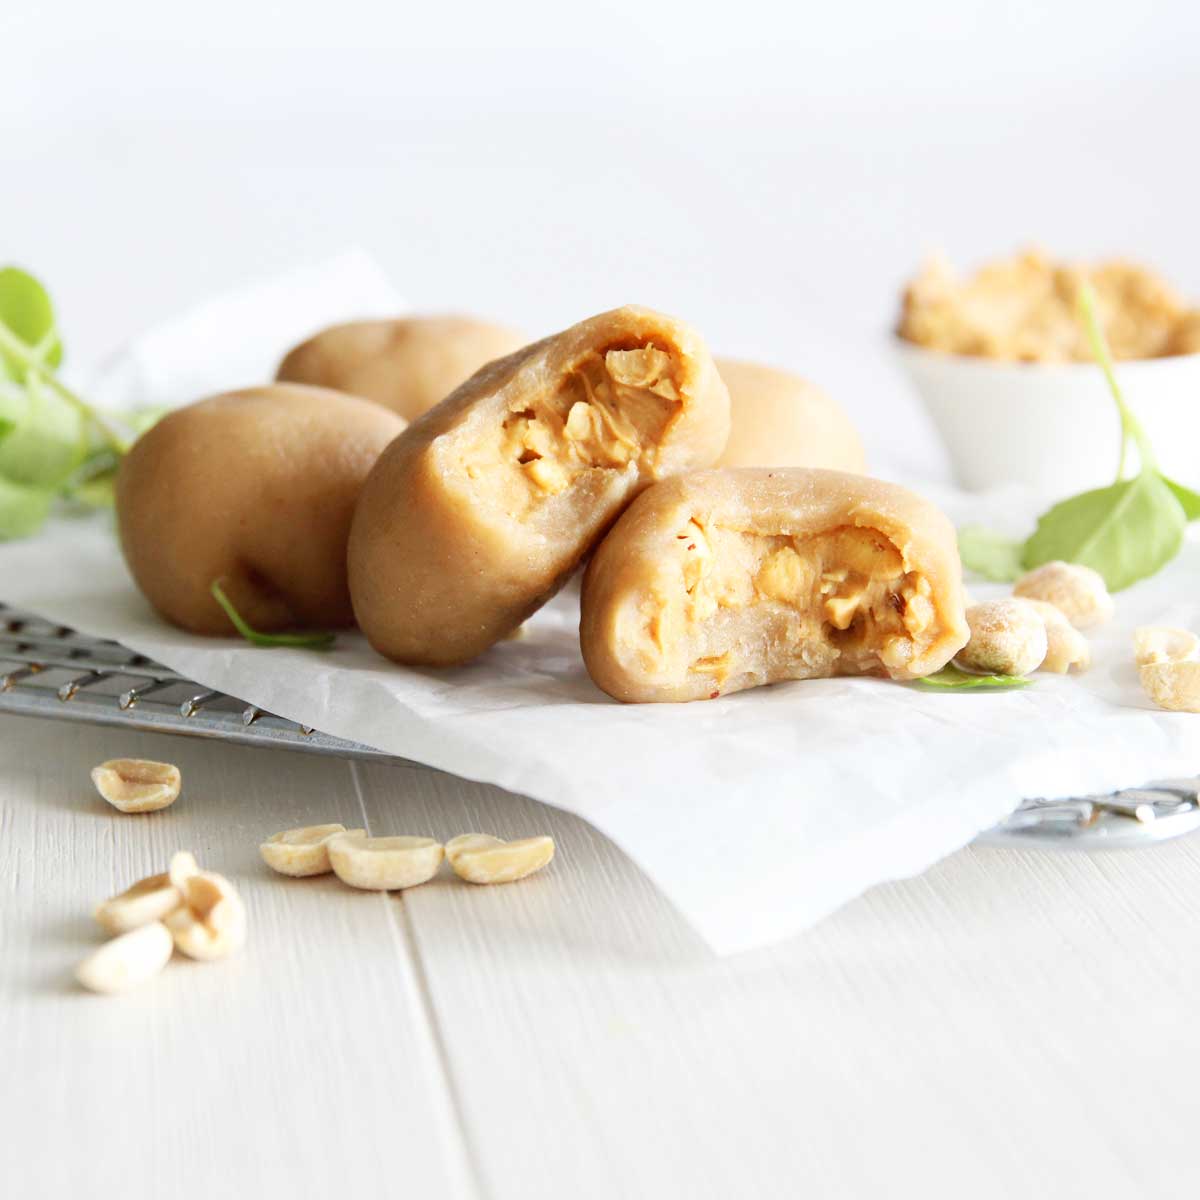 Chinese-Styled Peanut Butter Mochi Made in the Microwave - Banana Chocolate Mochi